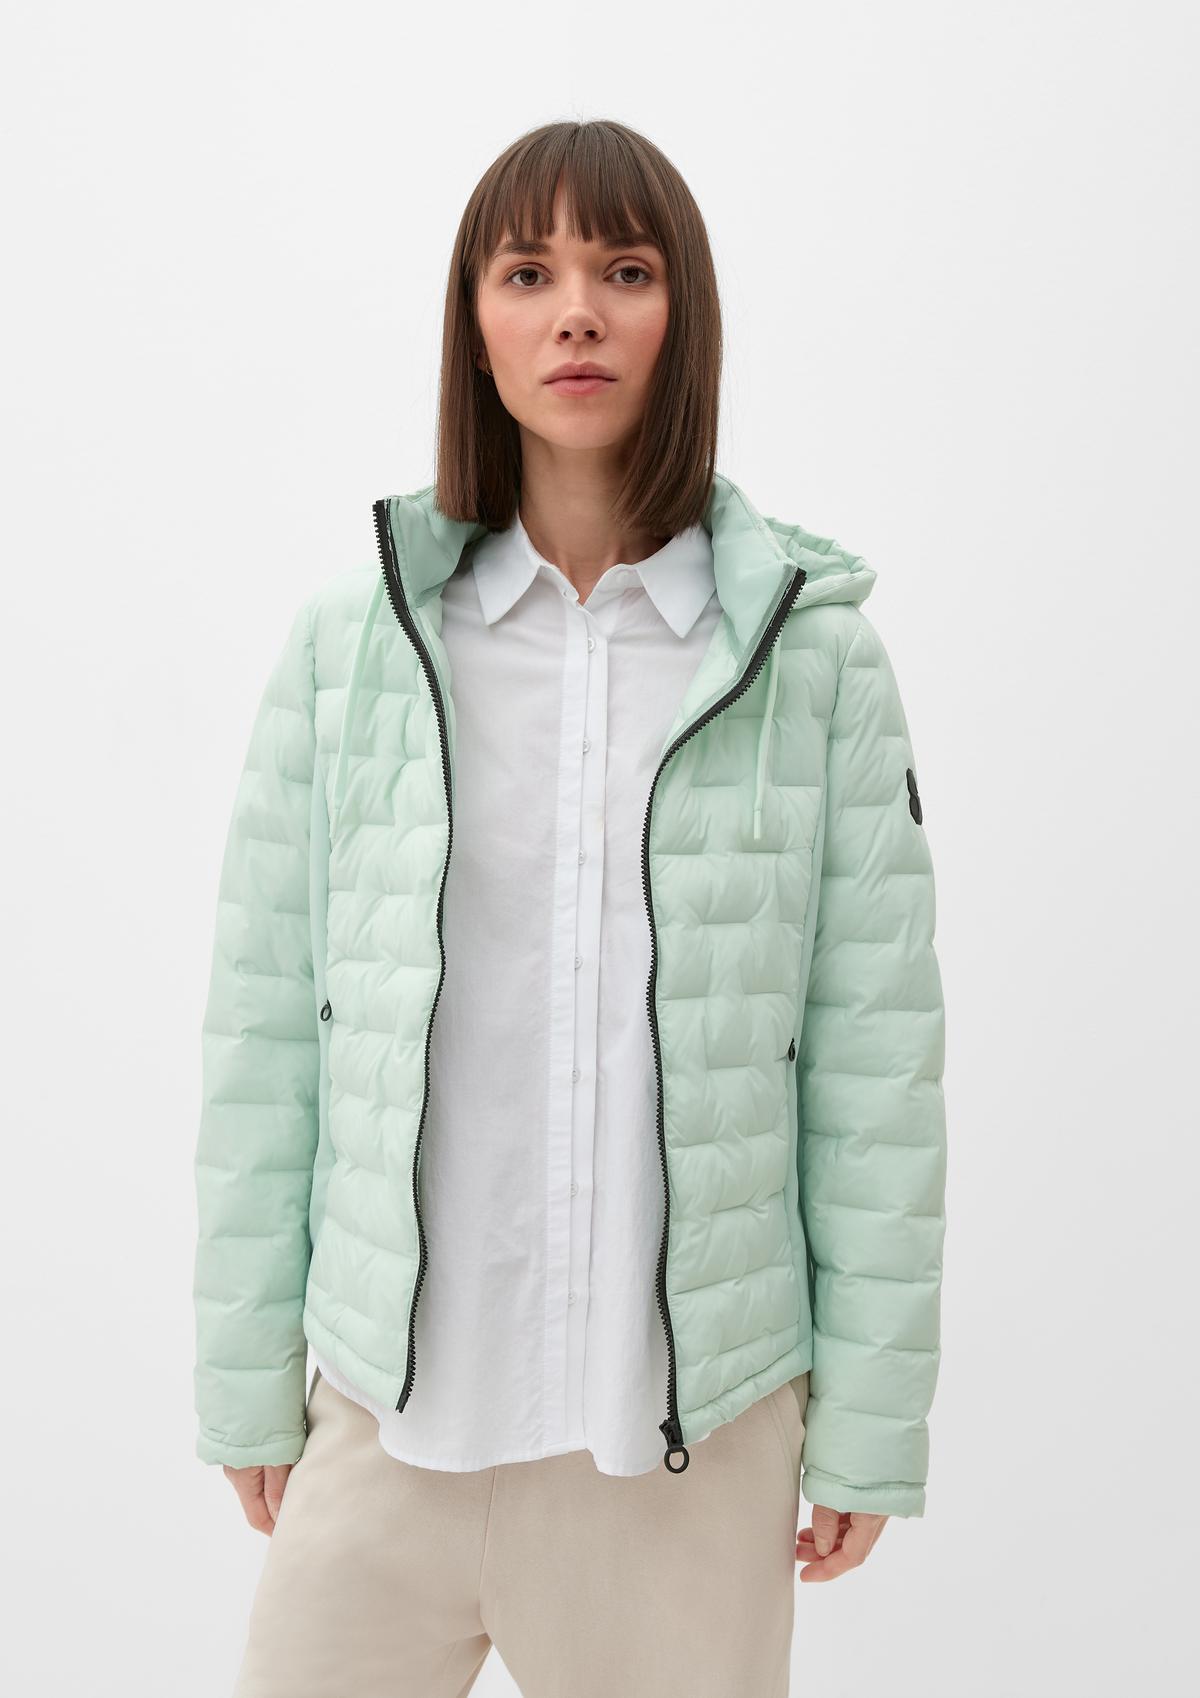 of Padded offwhite outdoor jacket materials a in - mix